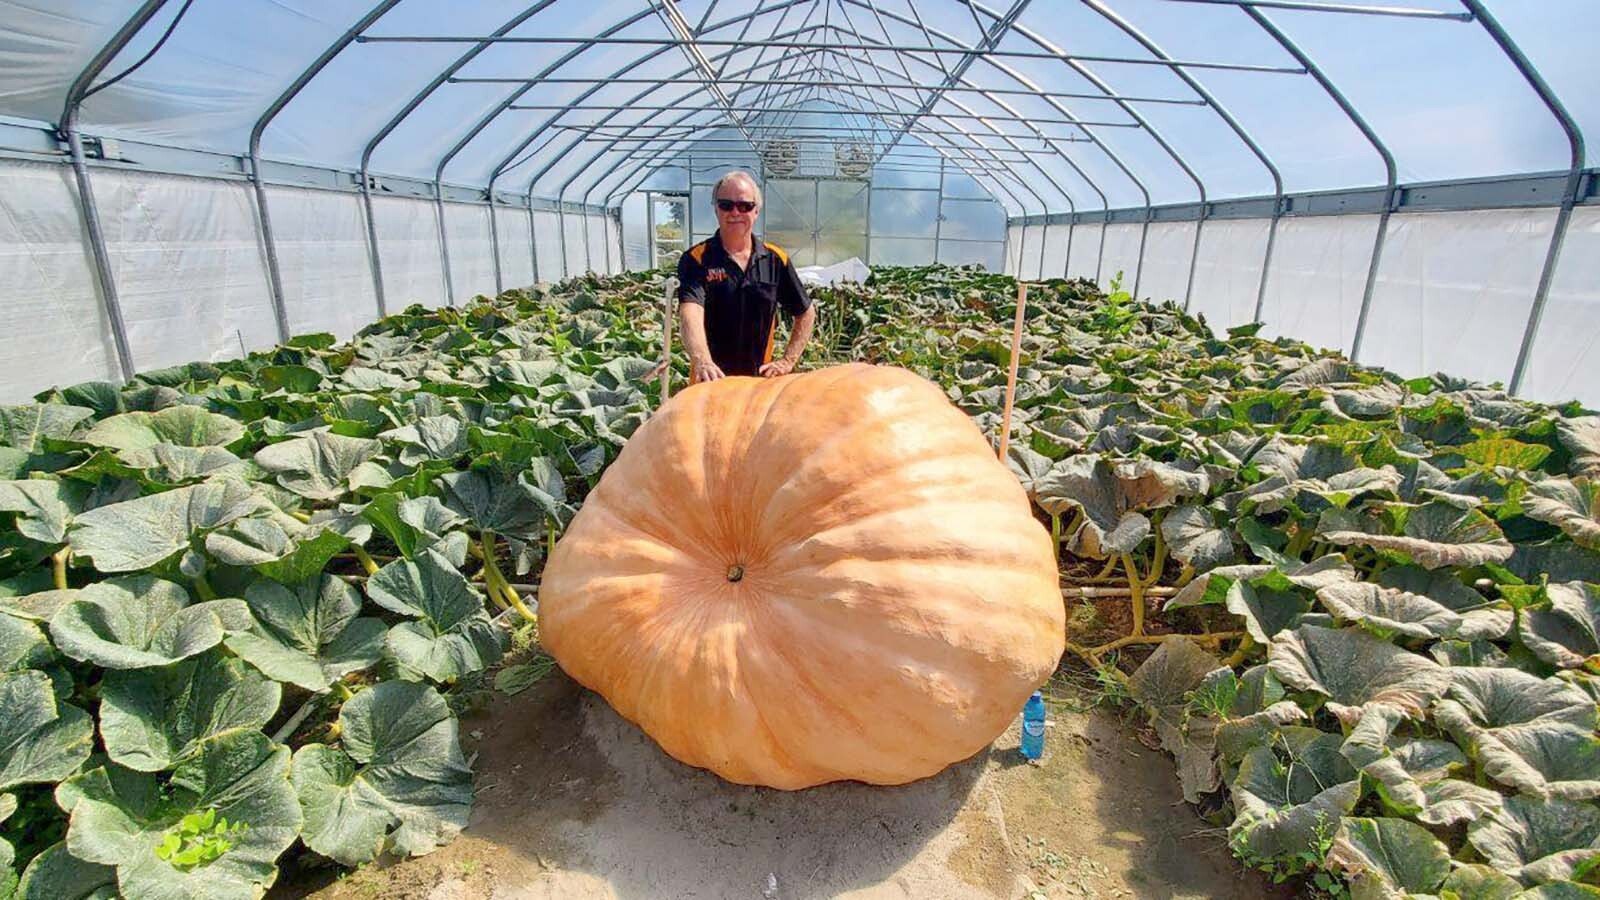 Jay Richard and "Marion," his 1,700-pound pumpkin in his P2K greenhouse in Worland. This is the first year Richard has used the custom-built greenhouse, where he can control the humidity and temperature needed to grow the biggest pumpkins possible. He won't reach 2,000 pounds this year, but he learned enough to get there in the future.